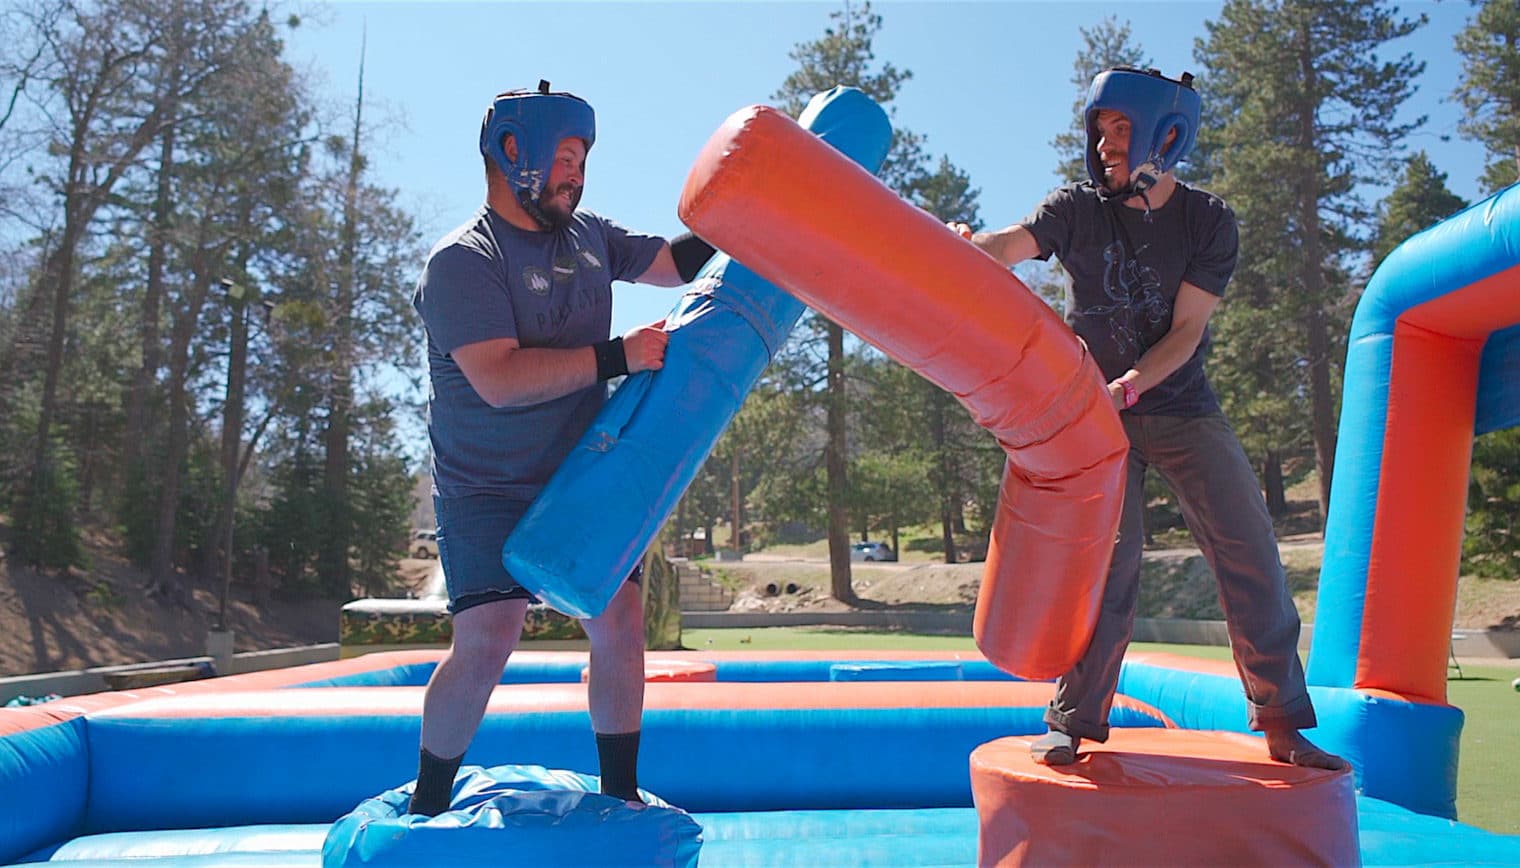 Two men jousting on a red and blue inflatable.